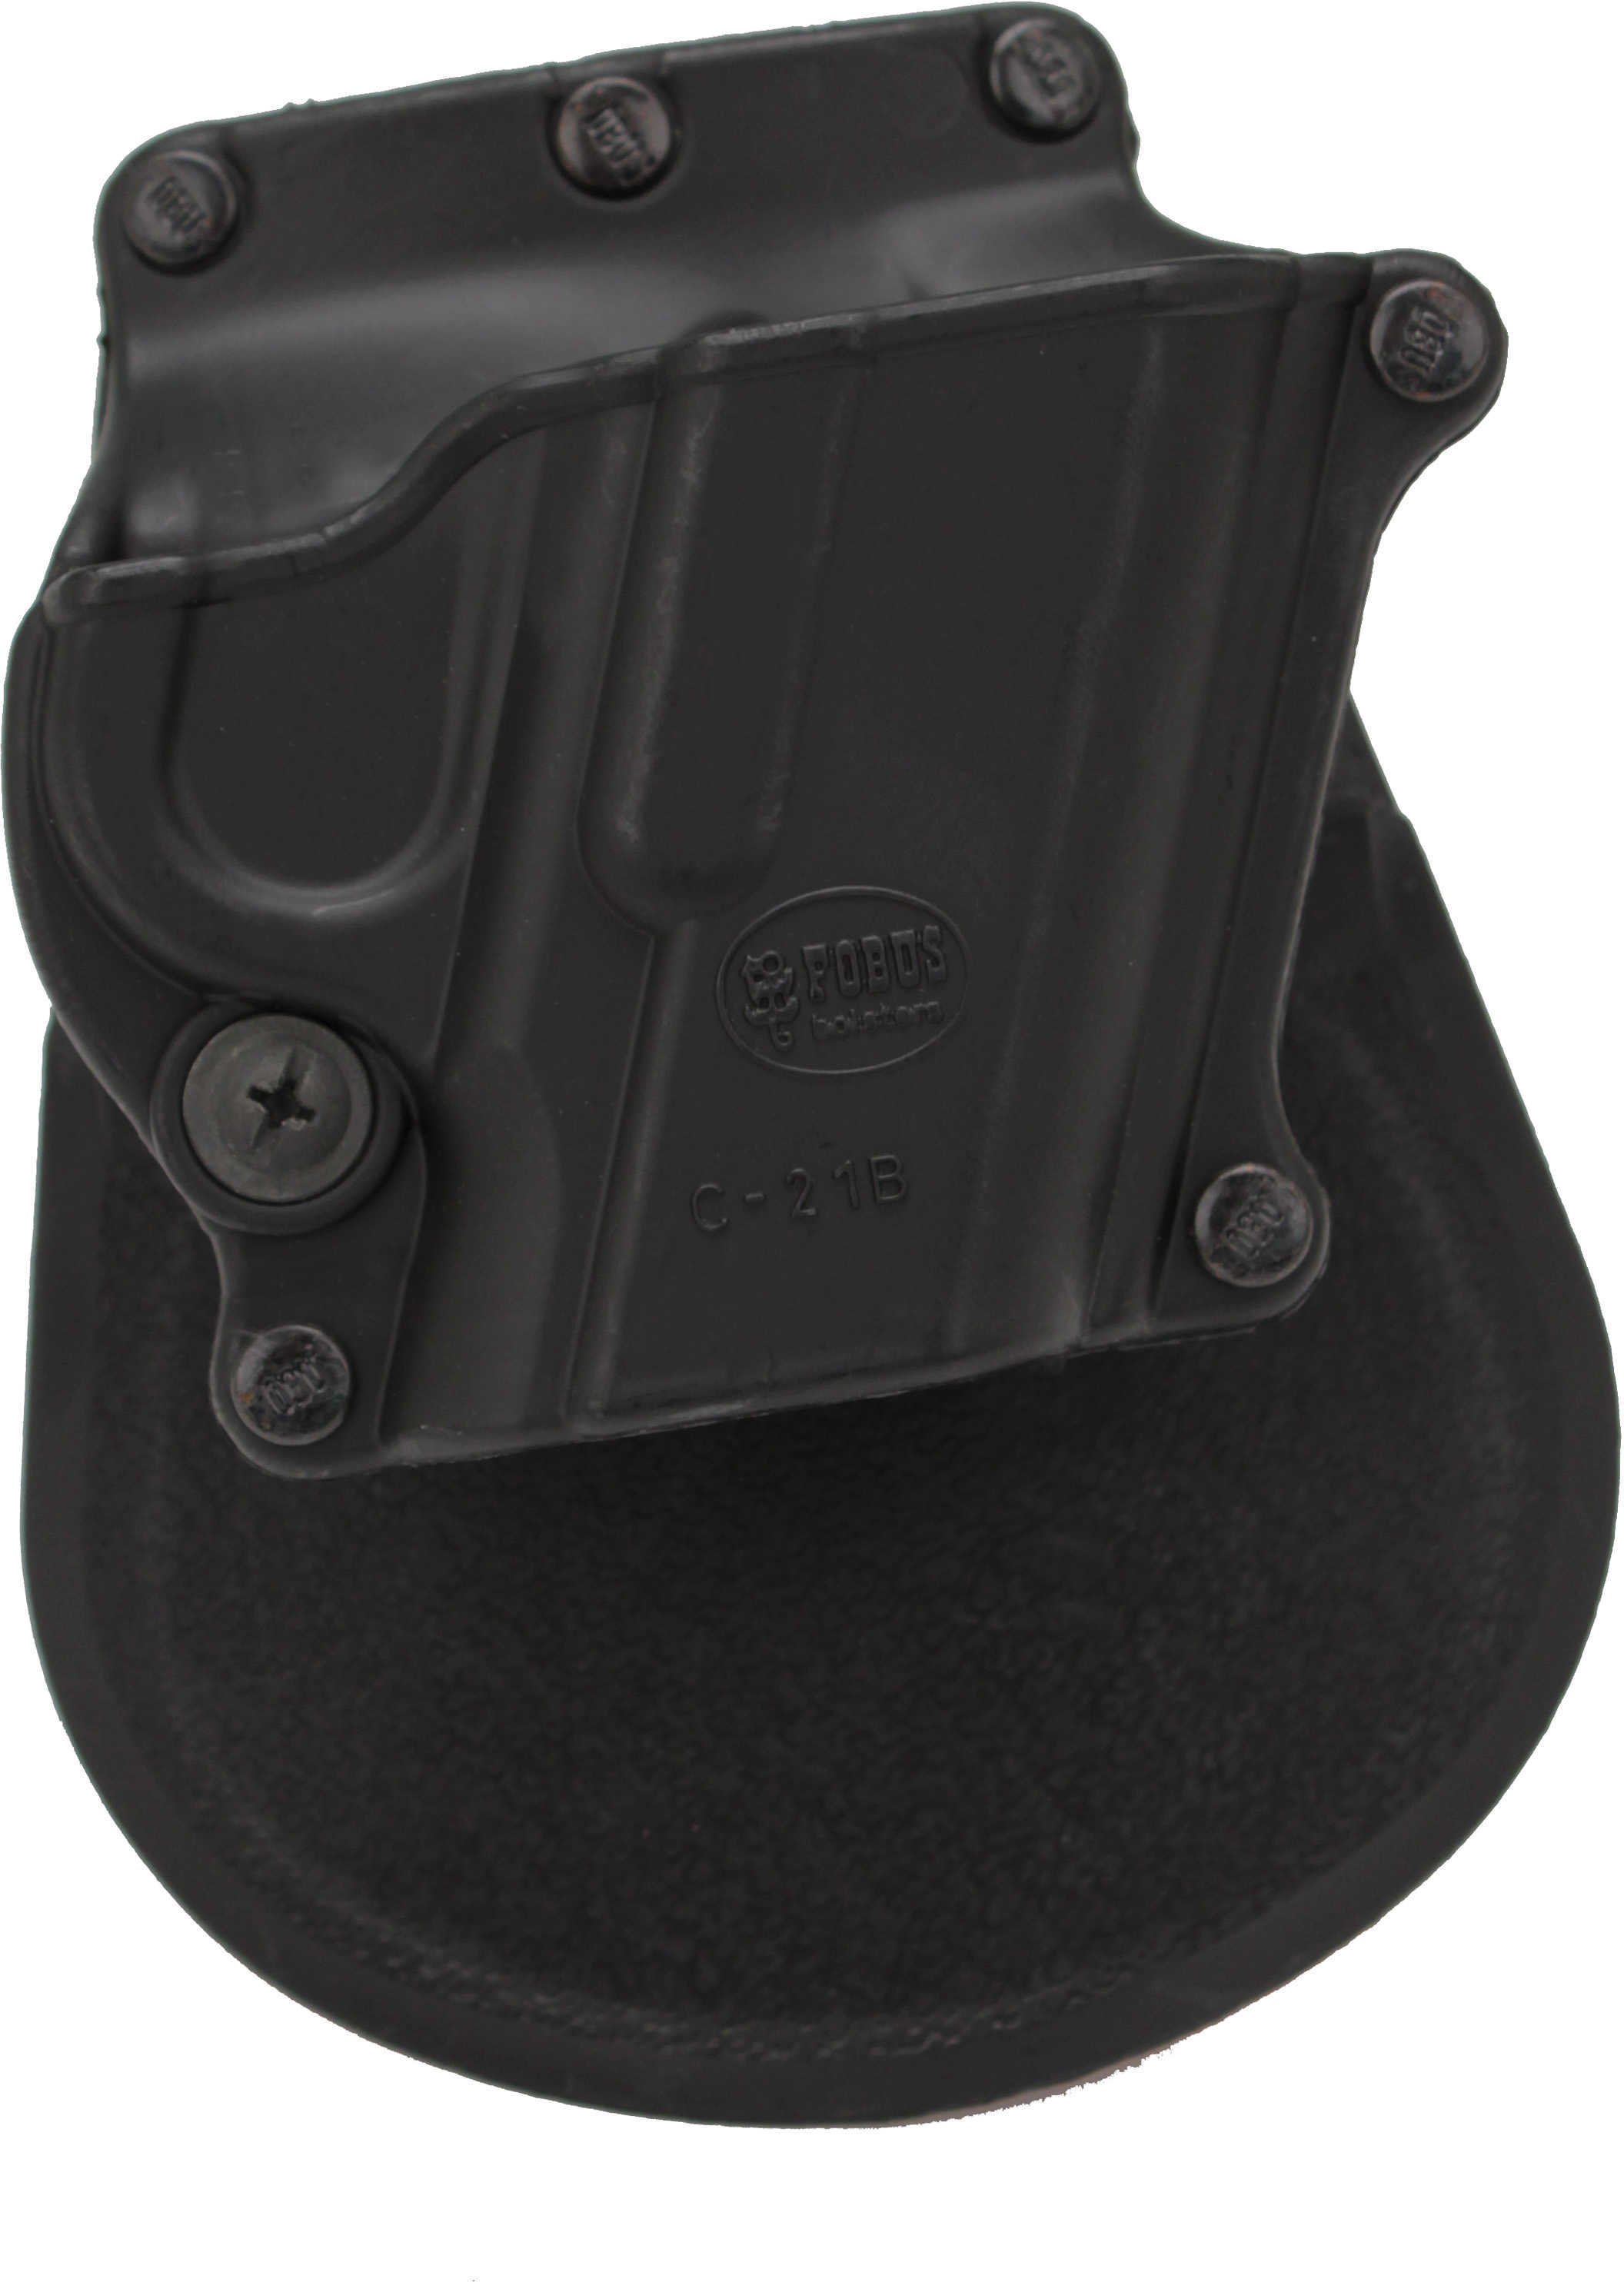 Fobus Yaqui Holster Fits Browning HP Compact Kahr All 9mm/40S&W 1911 Para C645 KEL-TEC PF9 Right Hand Kydex Blac